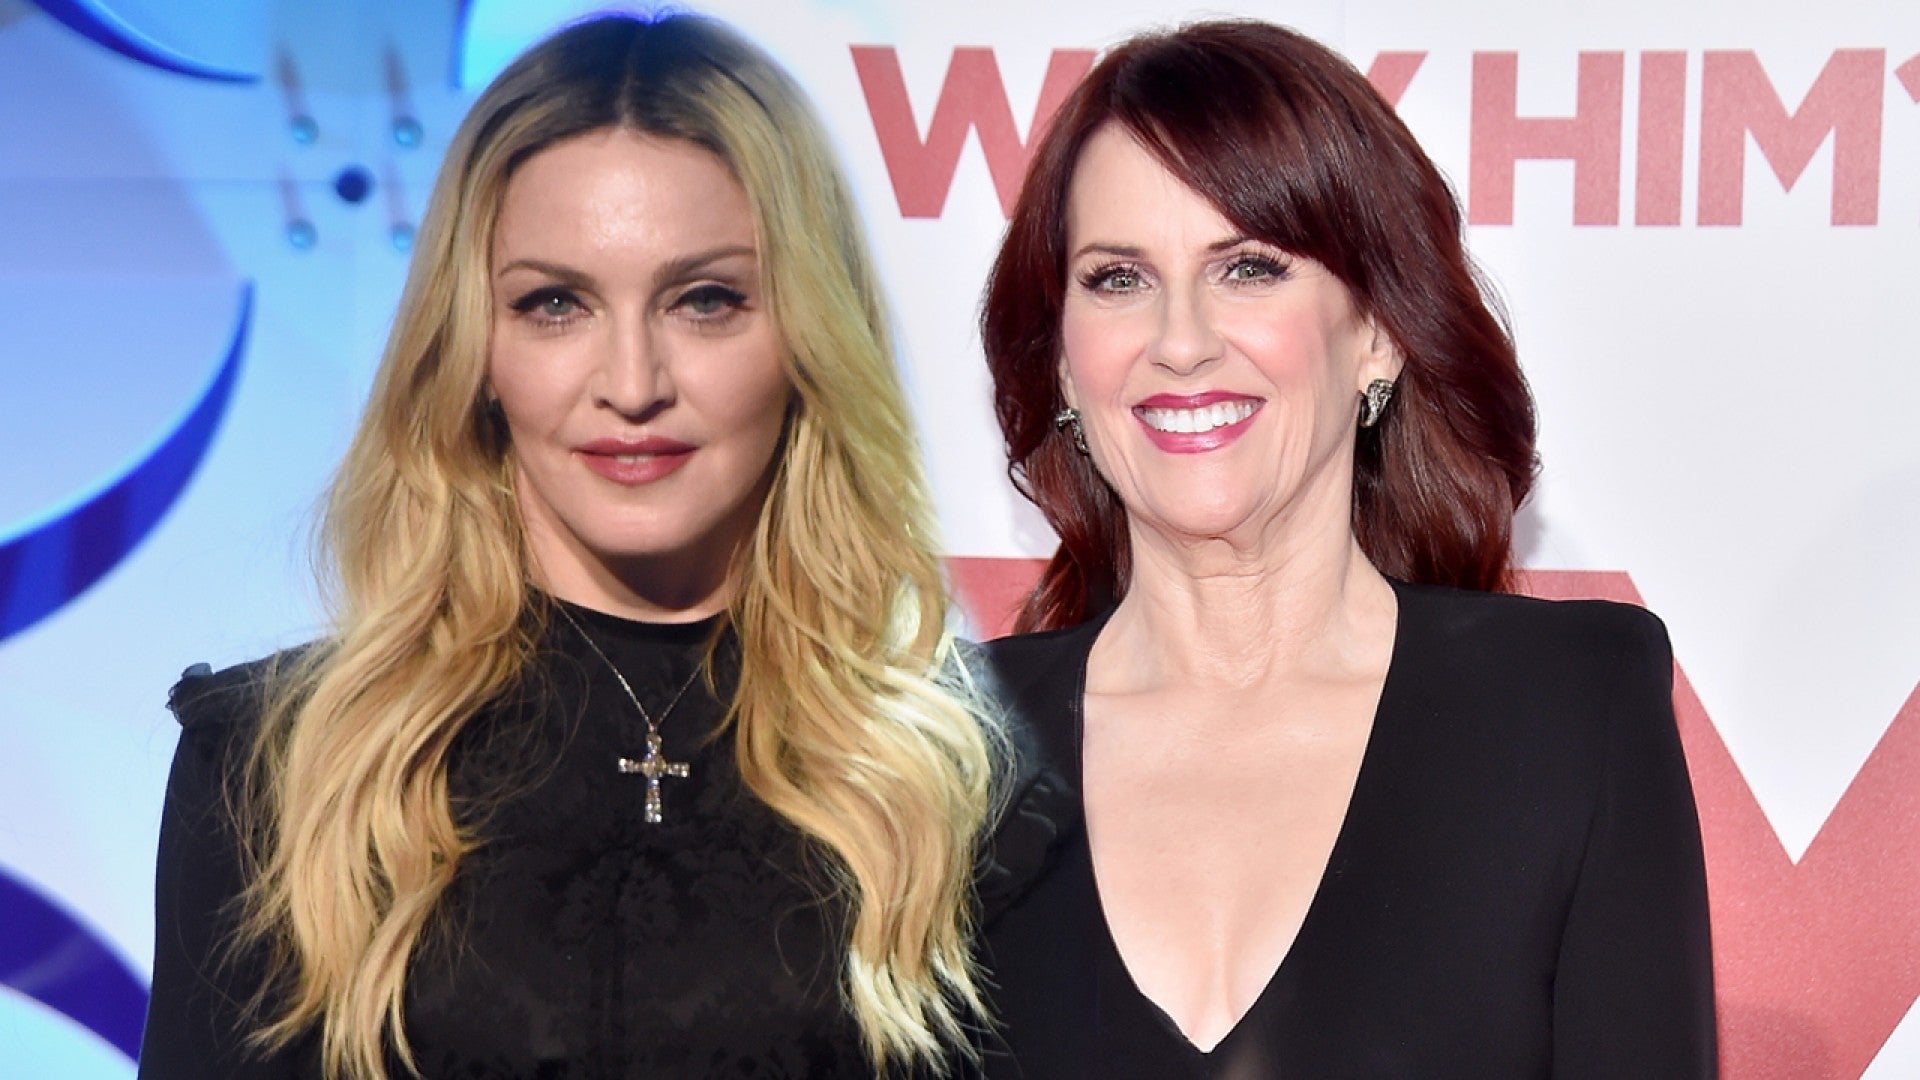 Megan Mullally Says Madonna Didn't Know the 'Will & Grace' Casts' Names:  'Why Should She, Who Cares?' | Entertainment Tonight